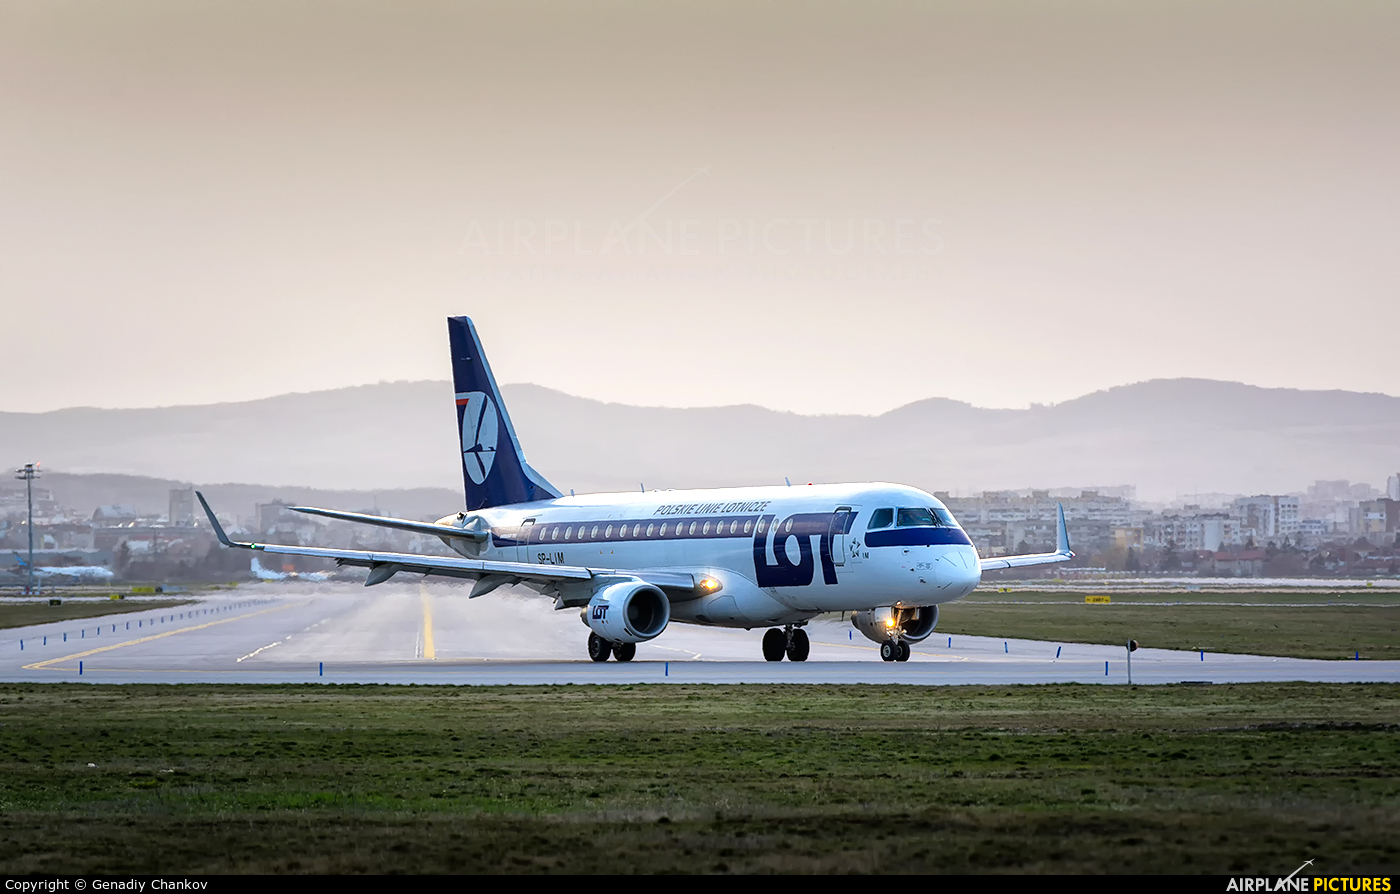 LOT - Polish Airlines SP-LIM aircraft at Sofia